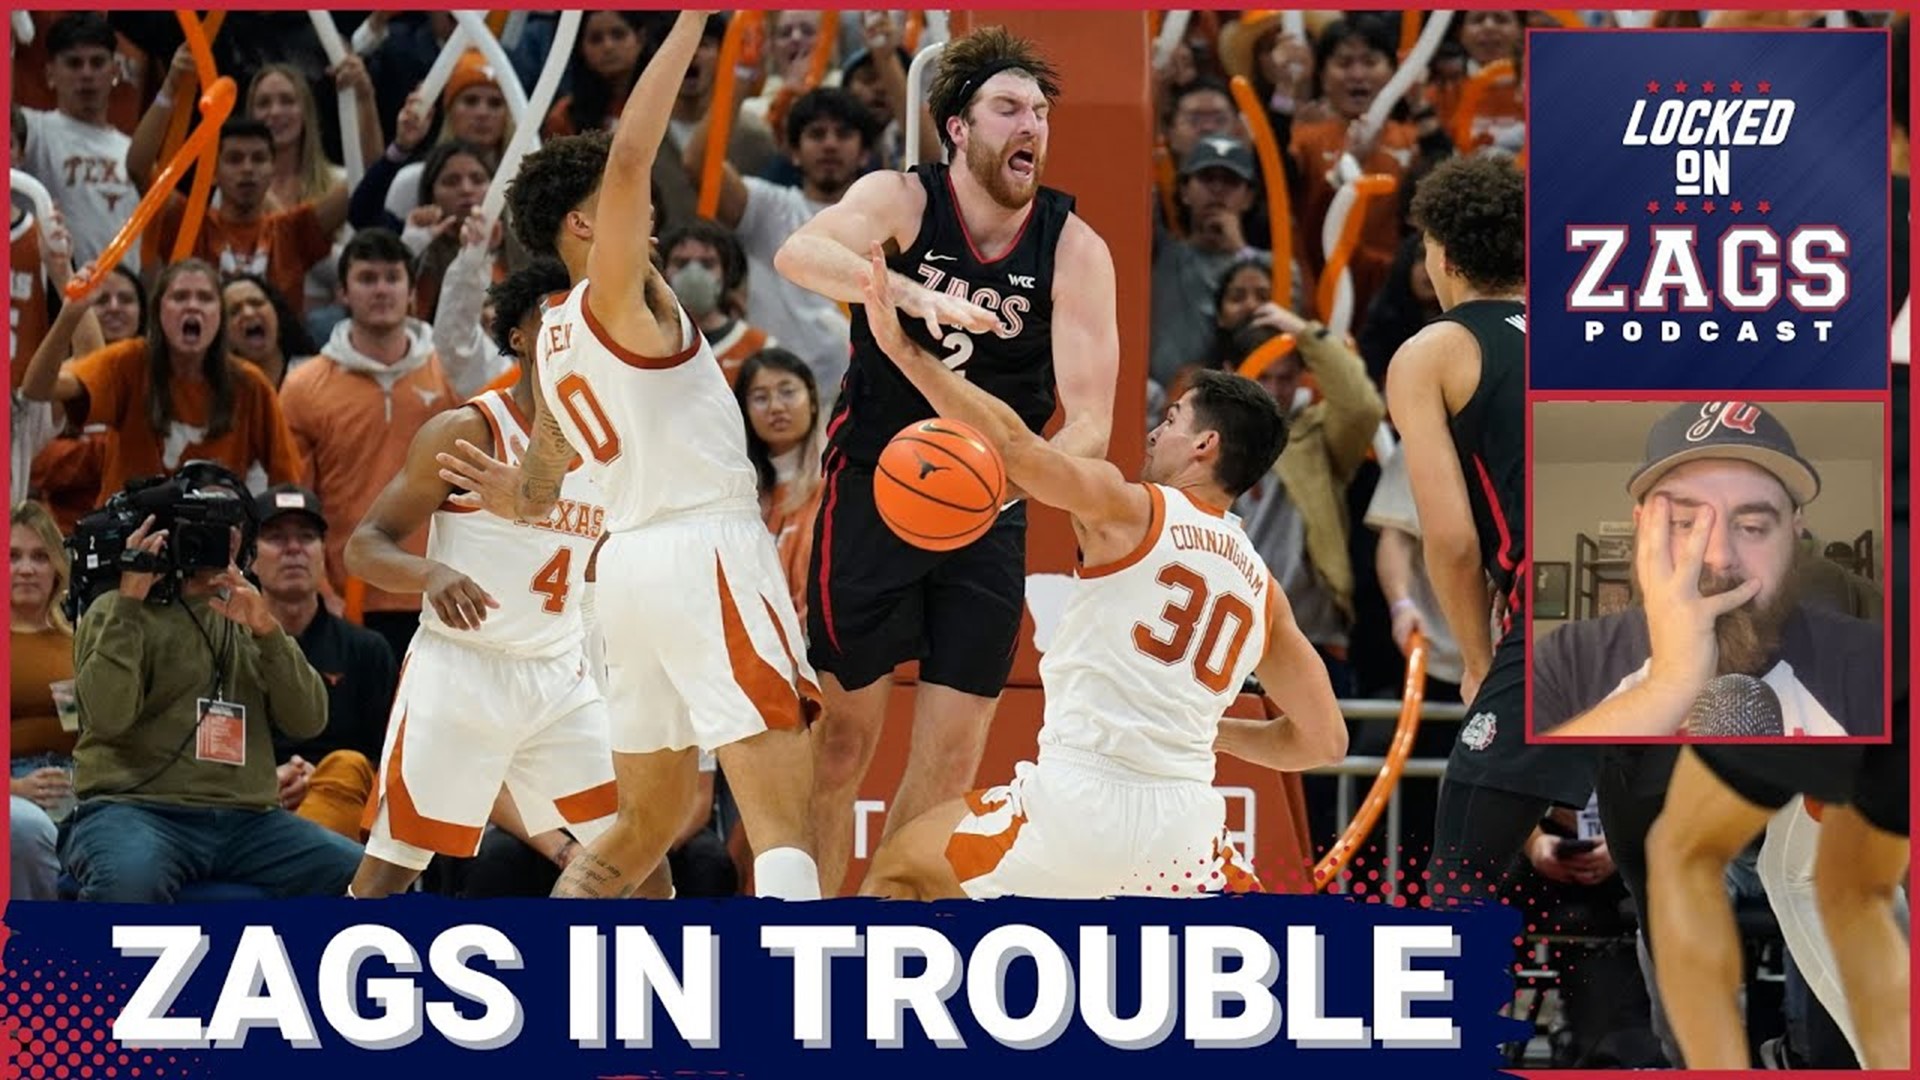 The Gonzaga Bulldogs got blown out in embarrassing fashion against Texas, turning the ball over 20 times and nearly losing by 20 points for the first time since 2010